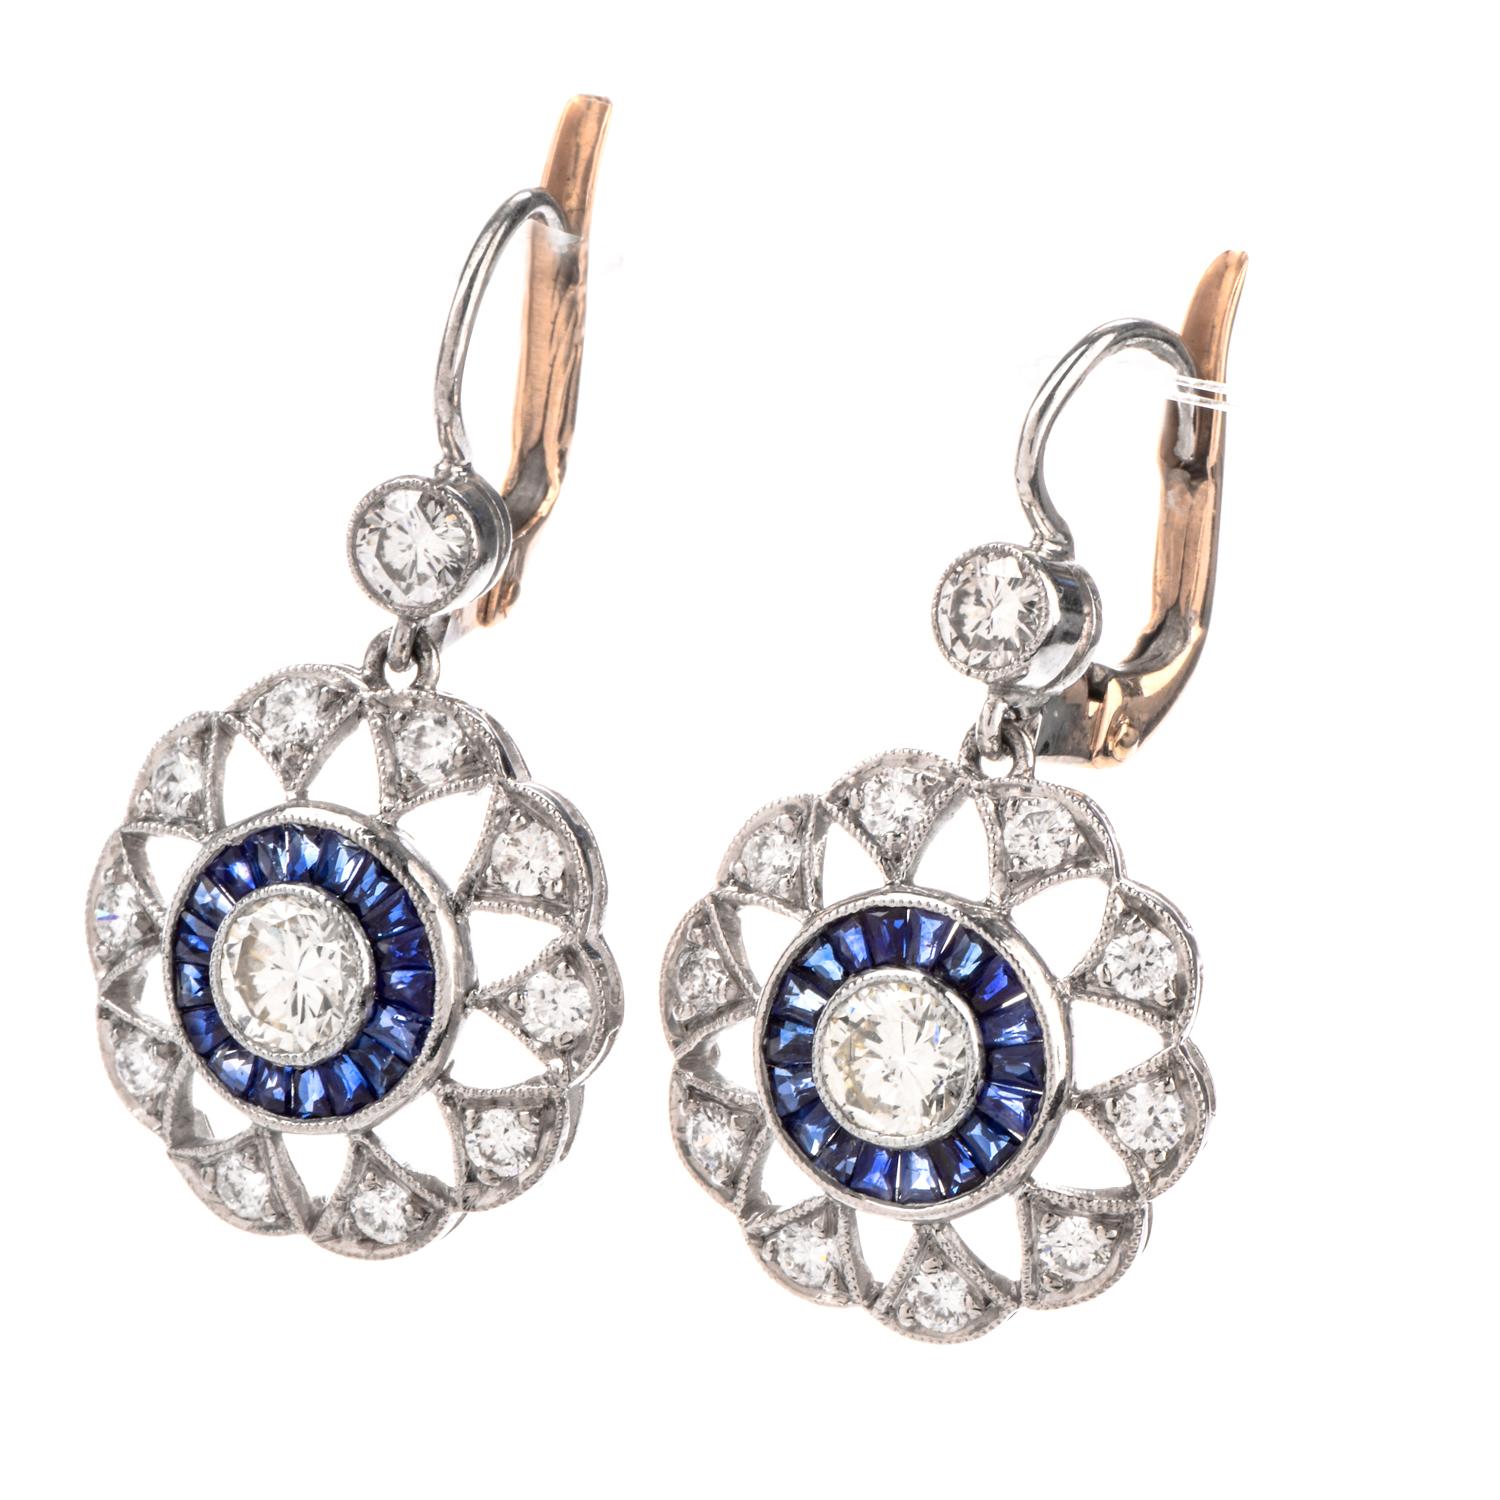 These  Diamond and Sapphire Earrings were inspired by a Pinwheel motif and crafted in Platinum with 18K Very Good condition.

A bezel set Diamond adorn the centermost area surrounded by channel set Sapphire and finally an open ring of